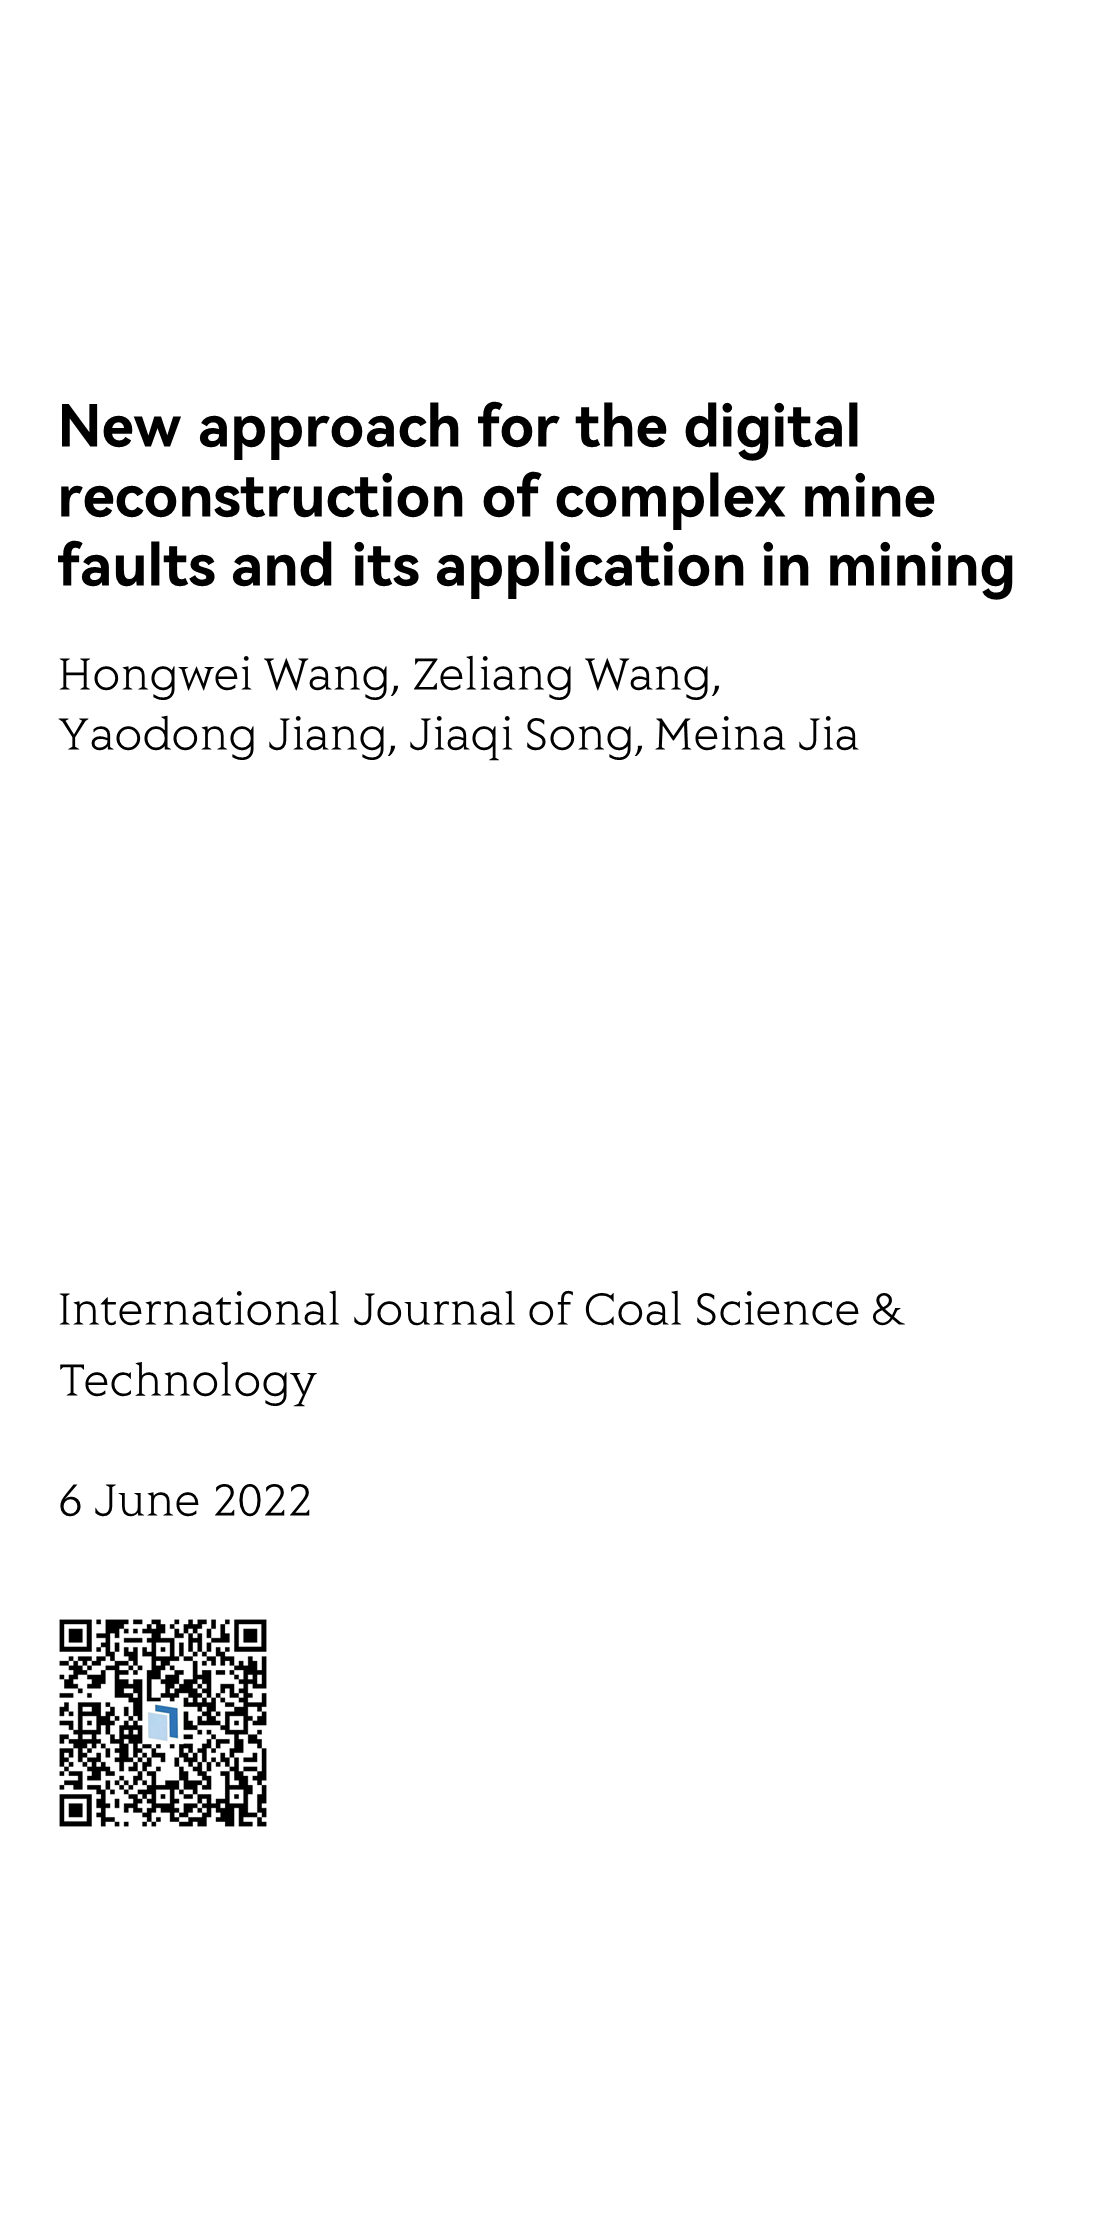 New approach for the digital reconstruction of complex mine faults and its application in mining_1